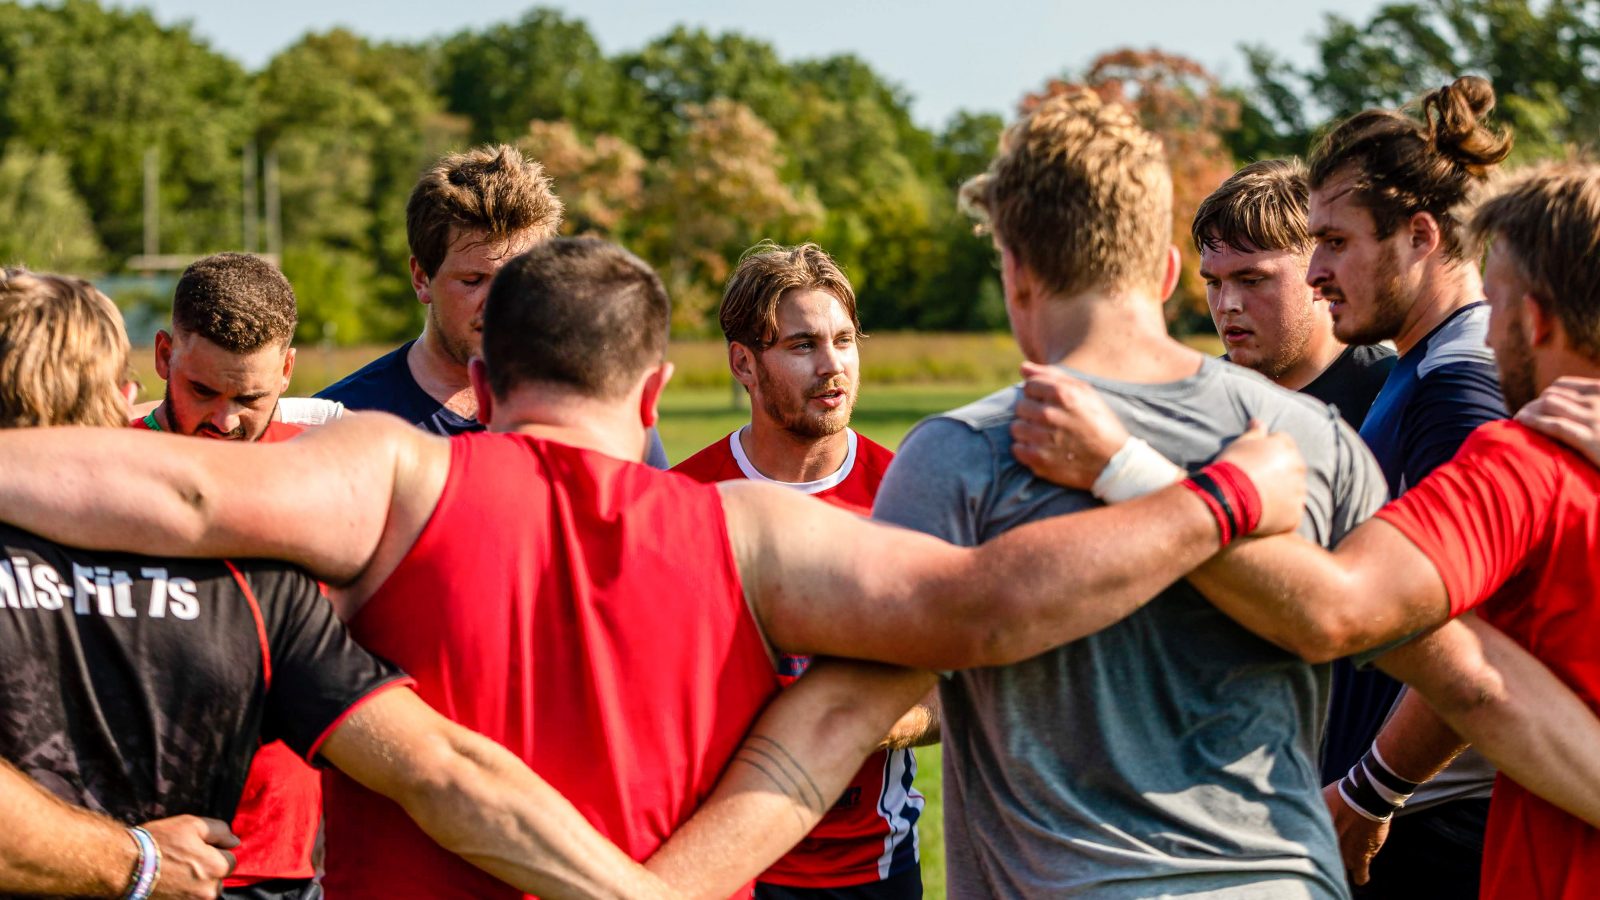 Athletes of a men’s rugby team lock arms in a huddle.